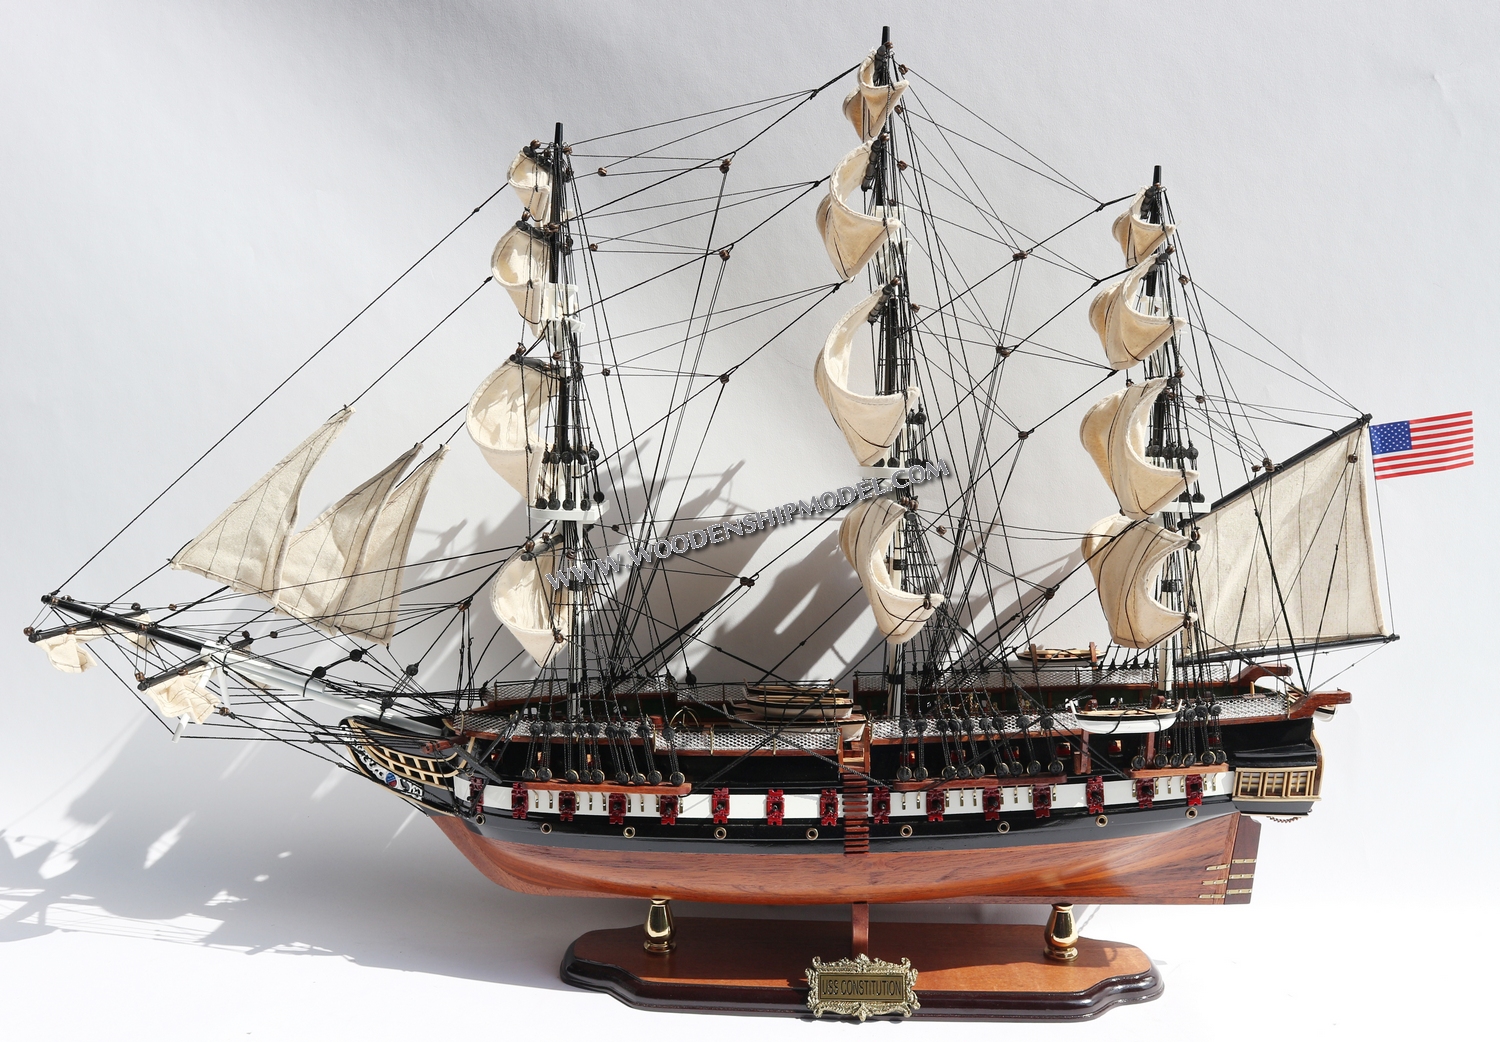 MODEL USS CONSTITUTION READY FOR DISPLAY